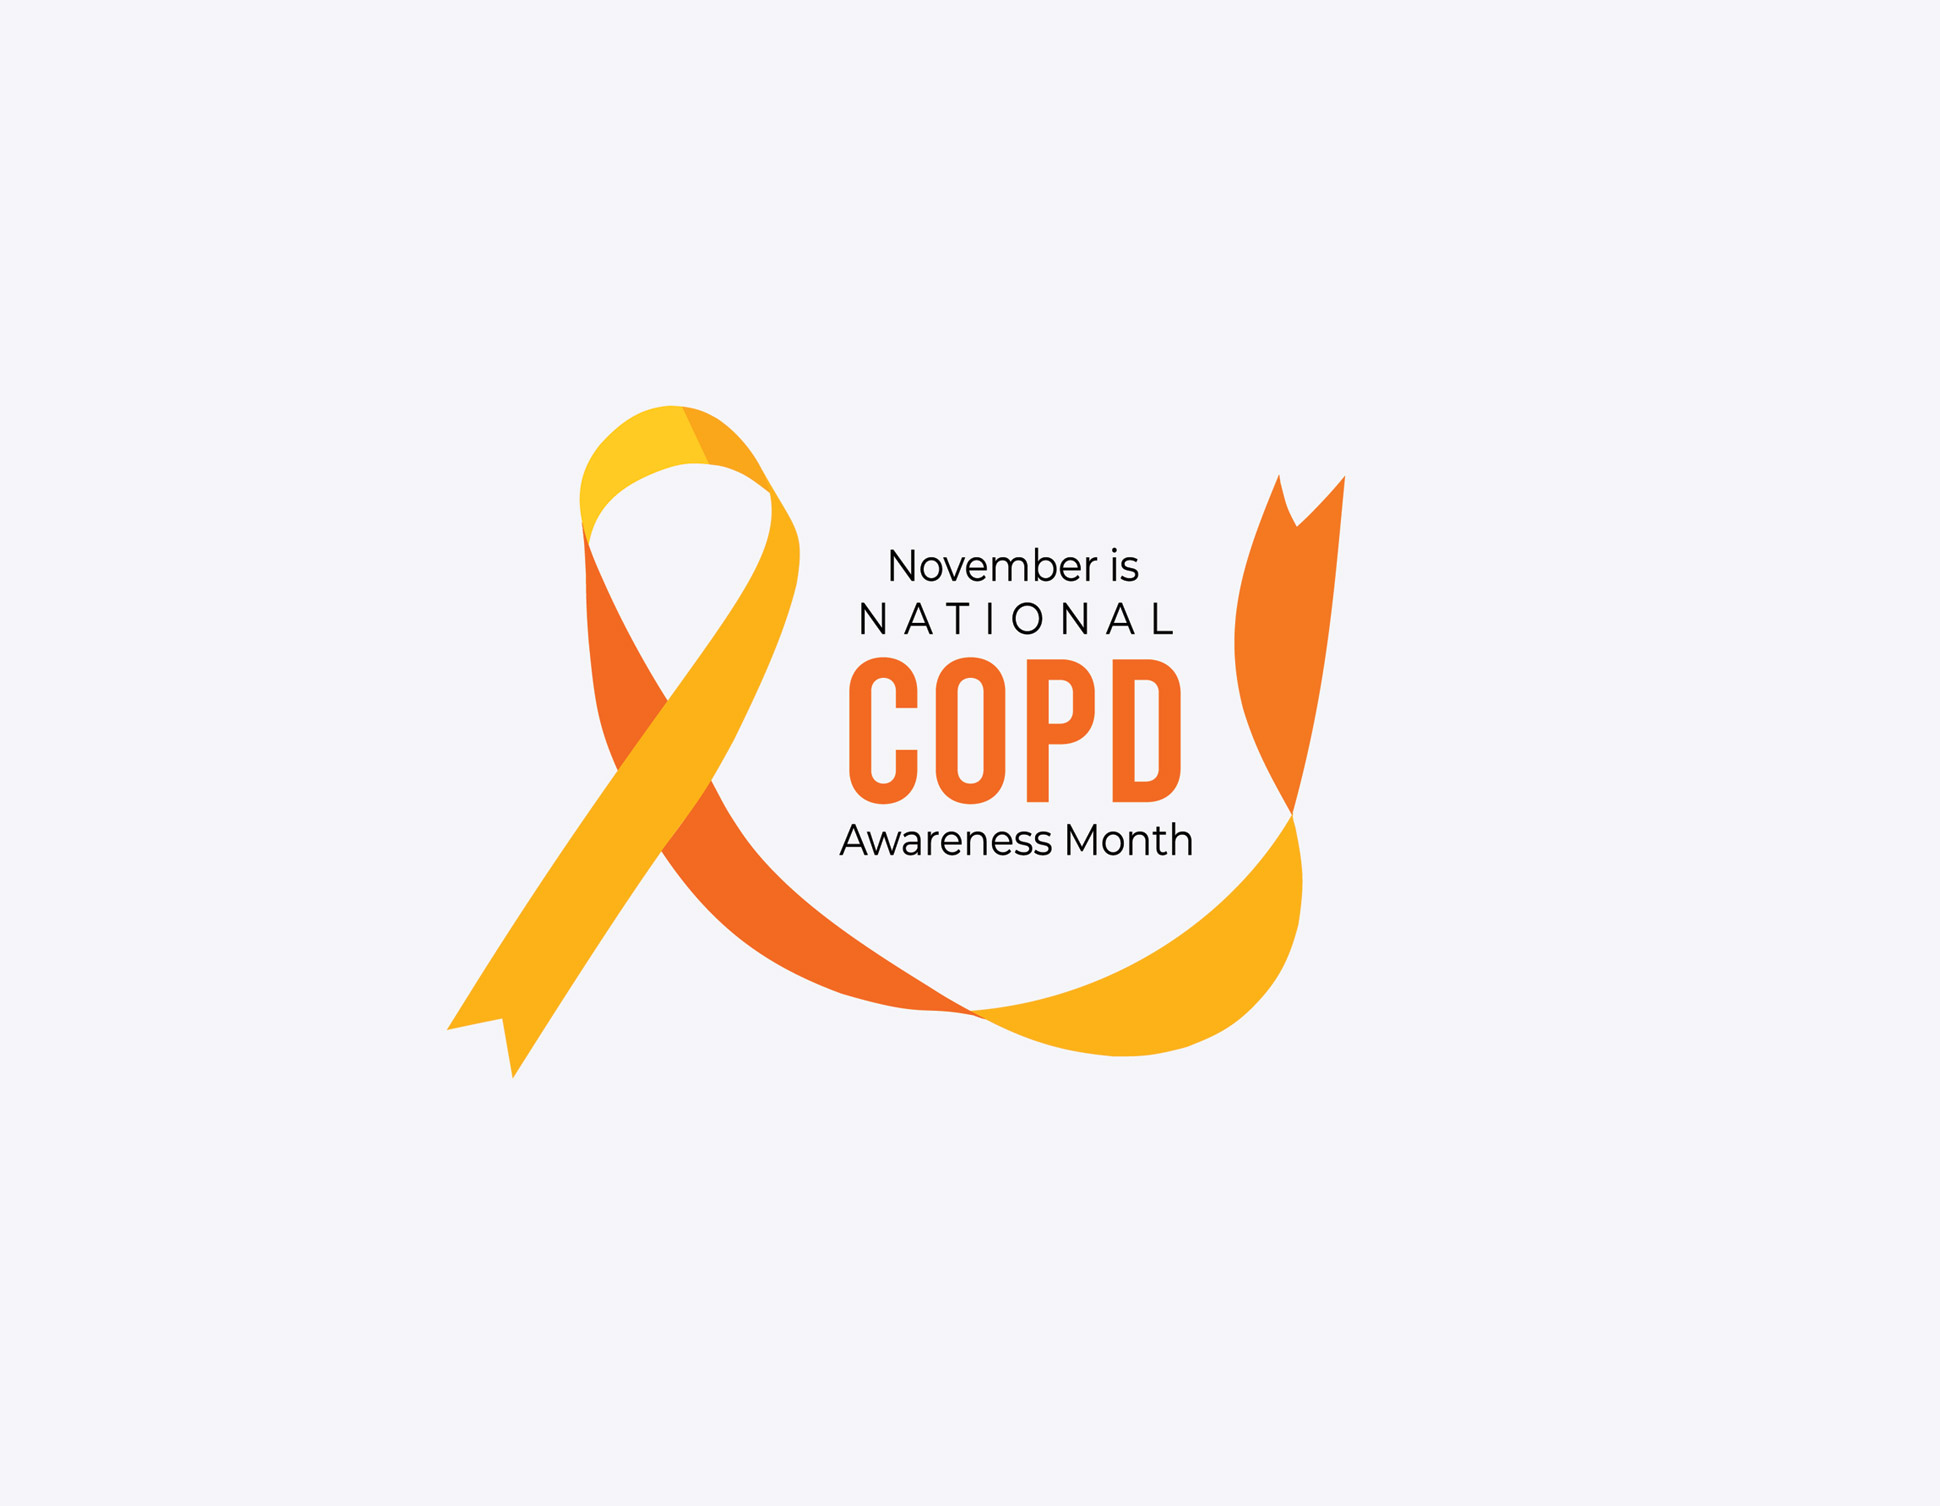 Early recognition of COPD is key to reducing lung damage.